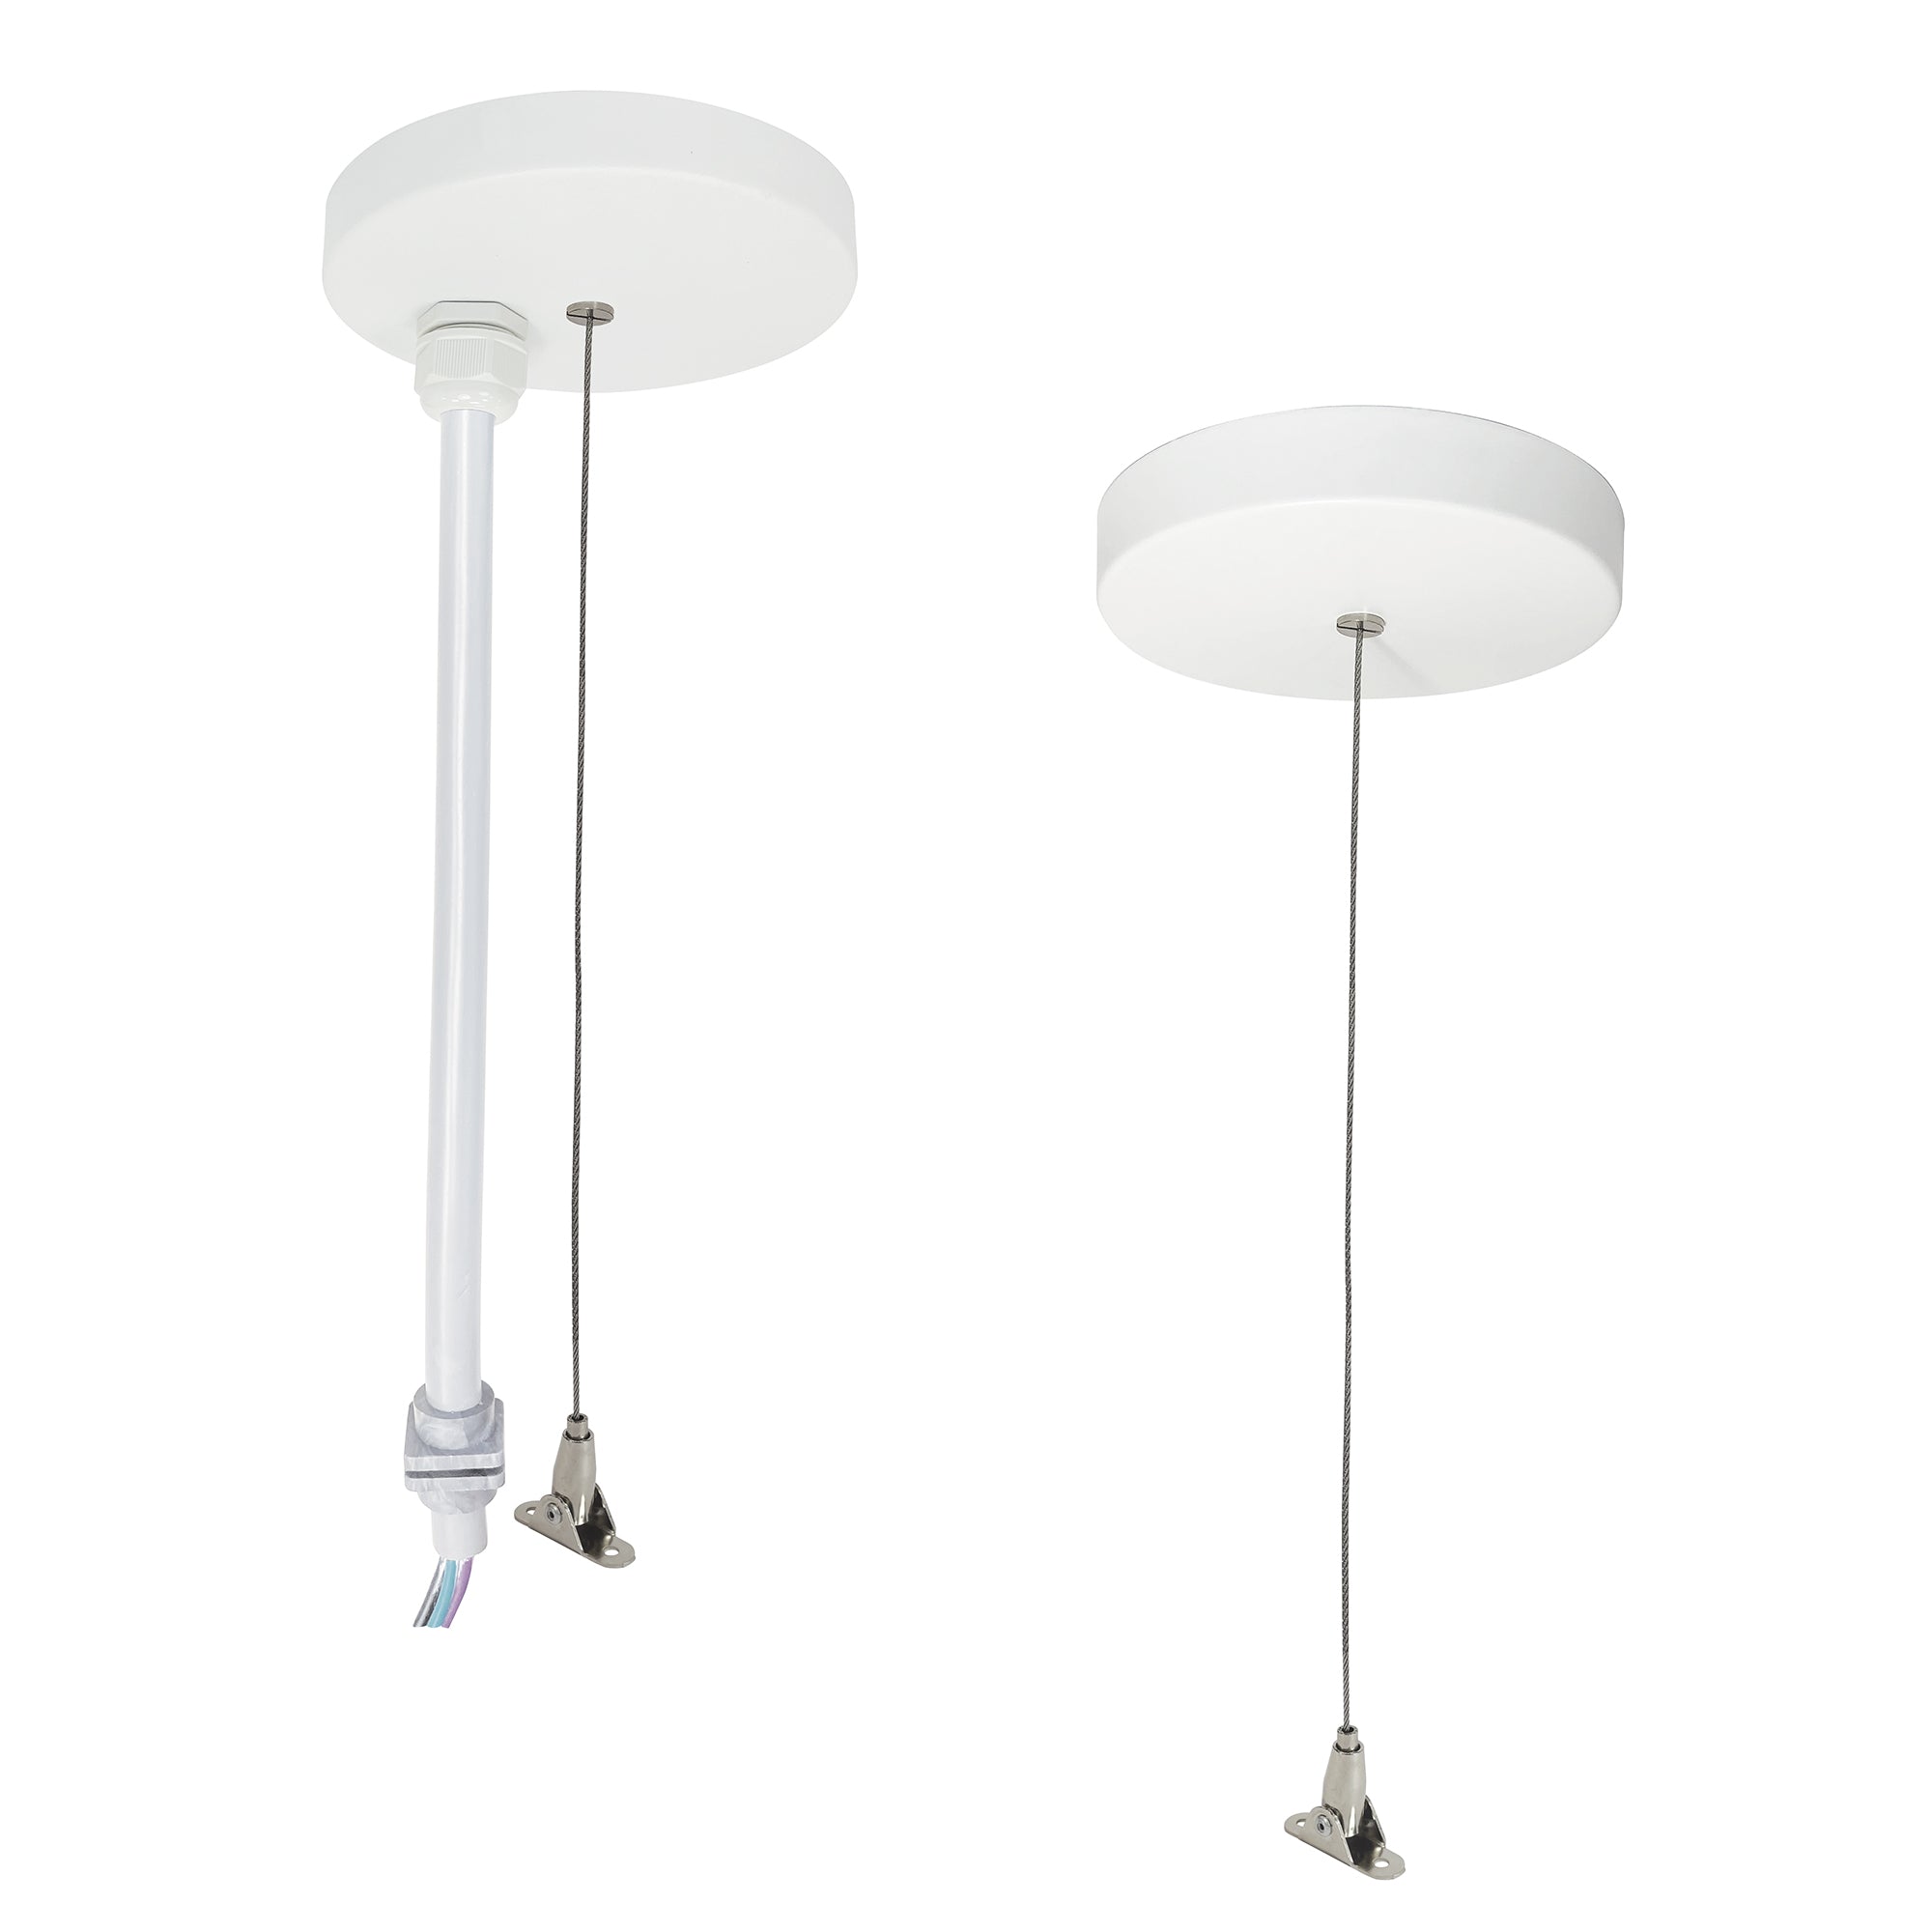 Nora Lighting NLUD-PCCW/6W-20 - Linear - 20' Pendant Power & Aircraft Mounting Kit for NLUD Series, White Finish, wired for EM